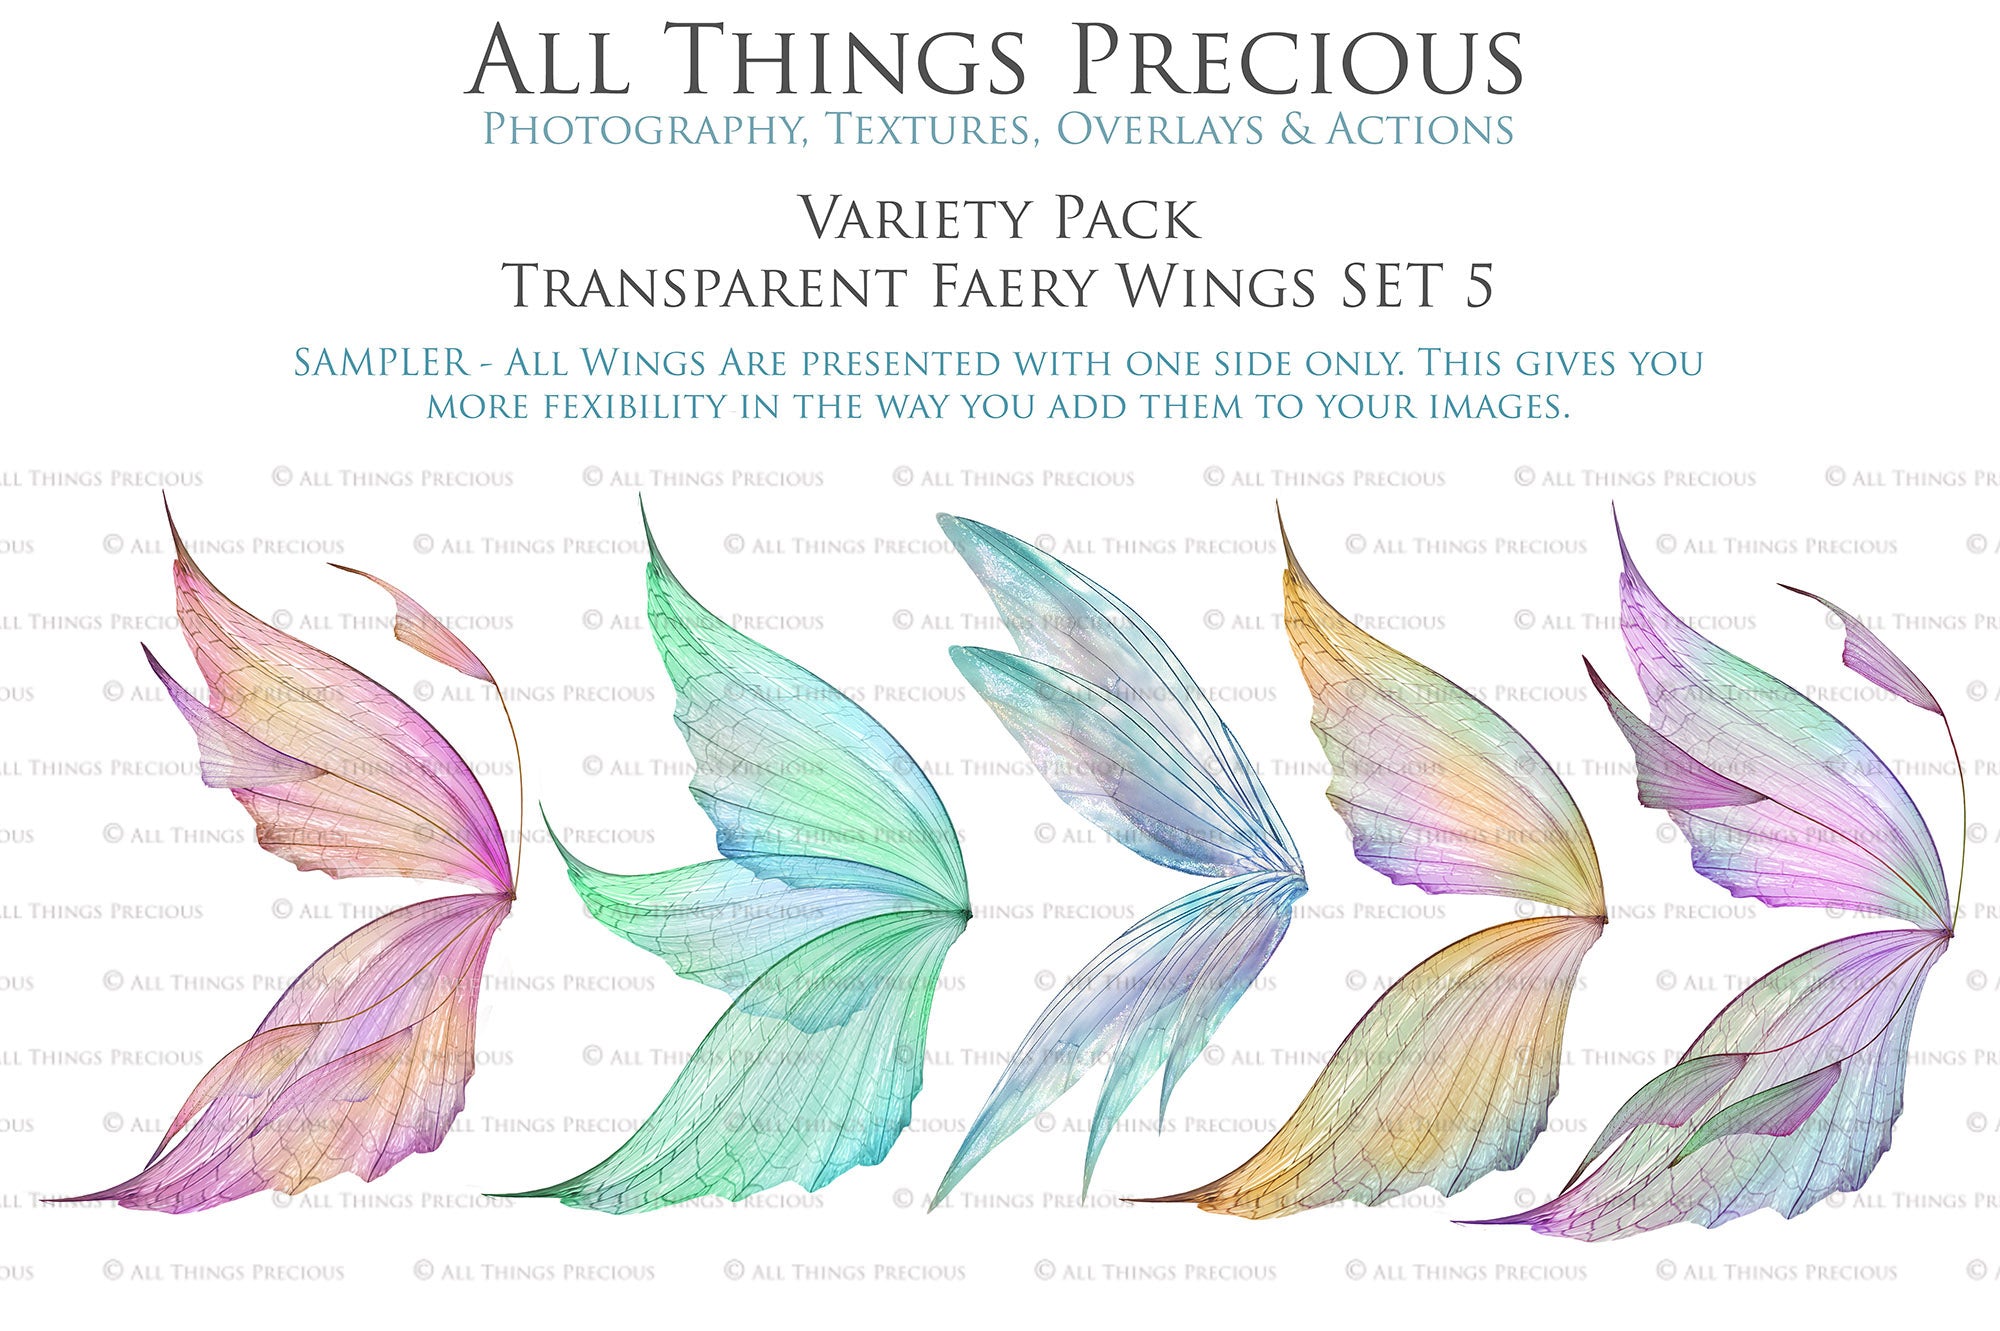 Fairy Wings Overlays For Photography, Photoshop, Digital art and Creatives. Transparent, high resolution wings for photographers. These are gorgeous PNG overlays for fantasy digital art and Child portraiture. colour, White fairy wings. Photo Overlays. Digital download. Graphic effects. ATP Textures